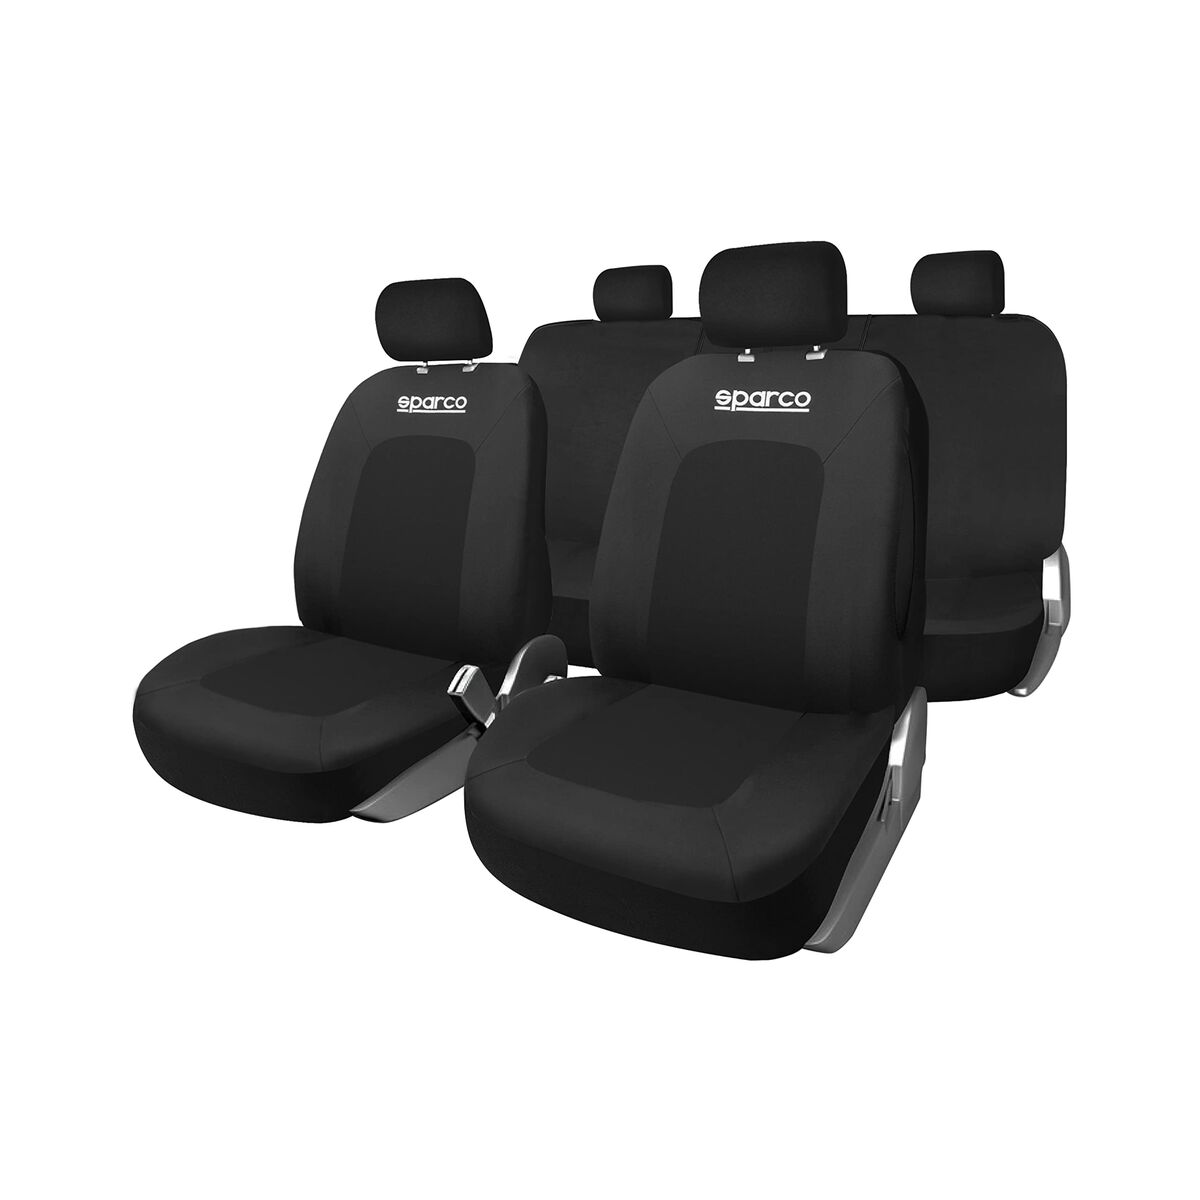 SPARCO Seat Covers Sport (Black)